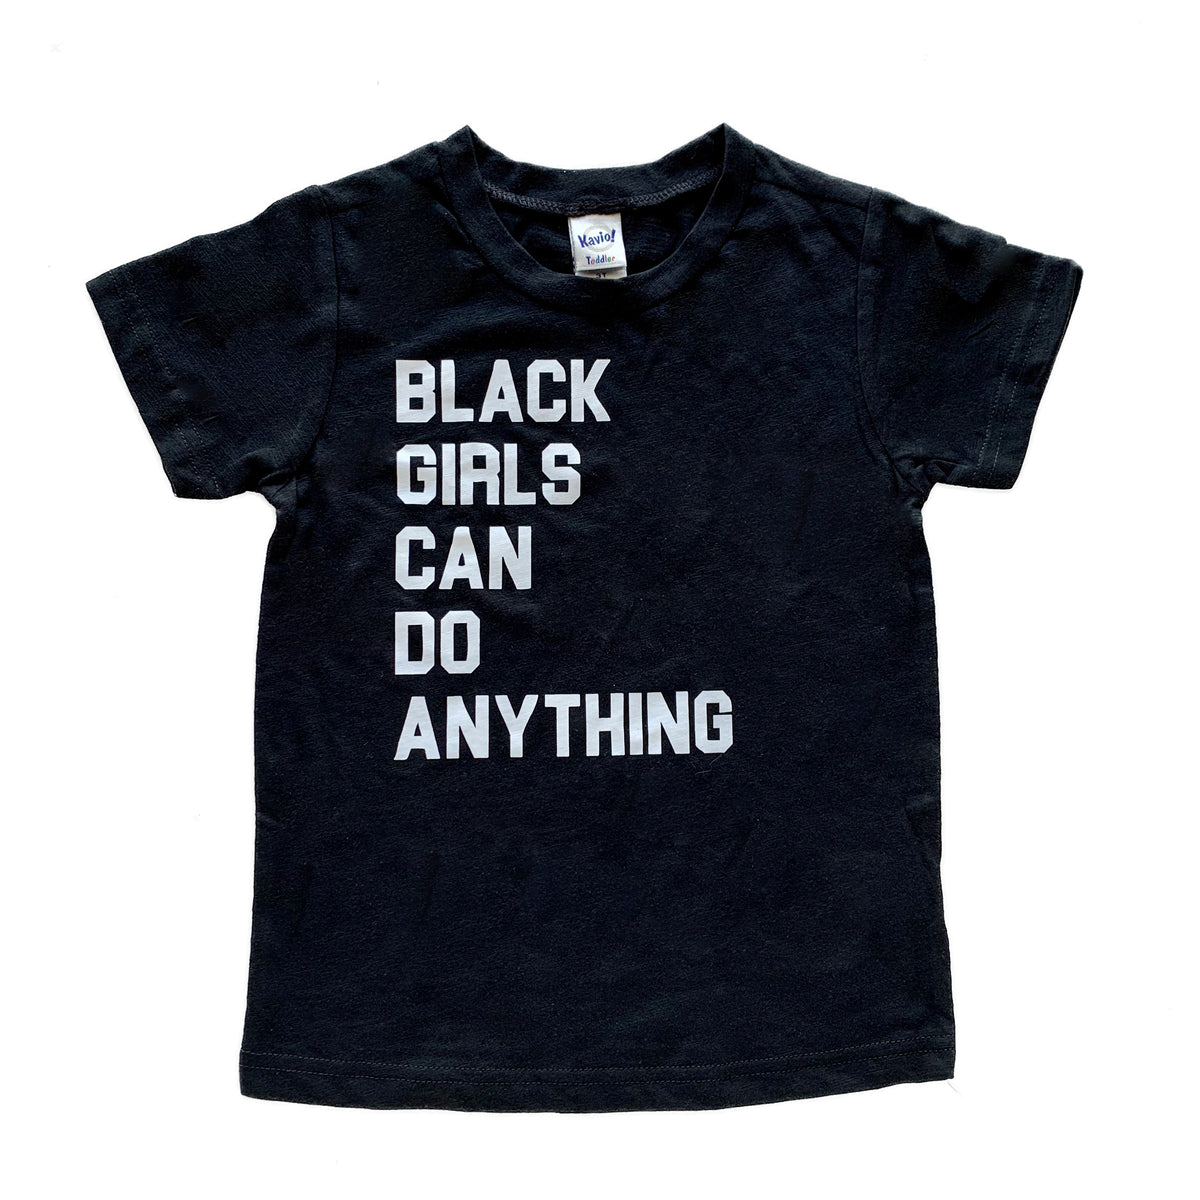 Typical Black Tee Black Girls Can Do Anything Short Sleeve Tee in Black/White